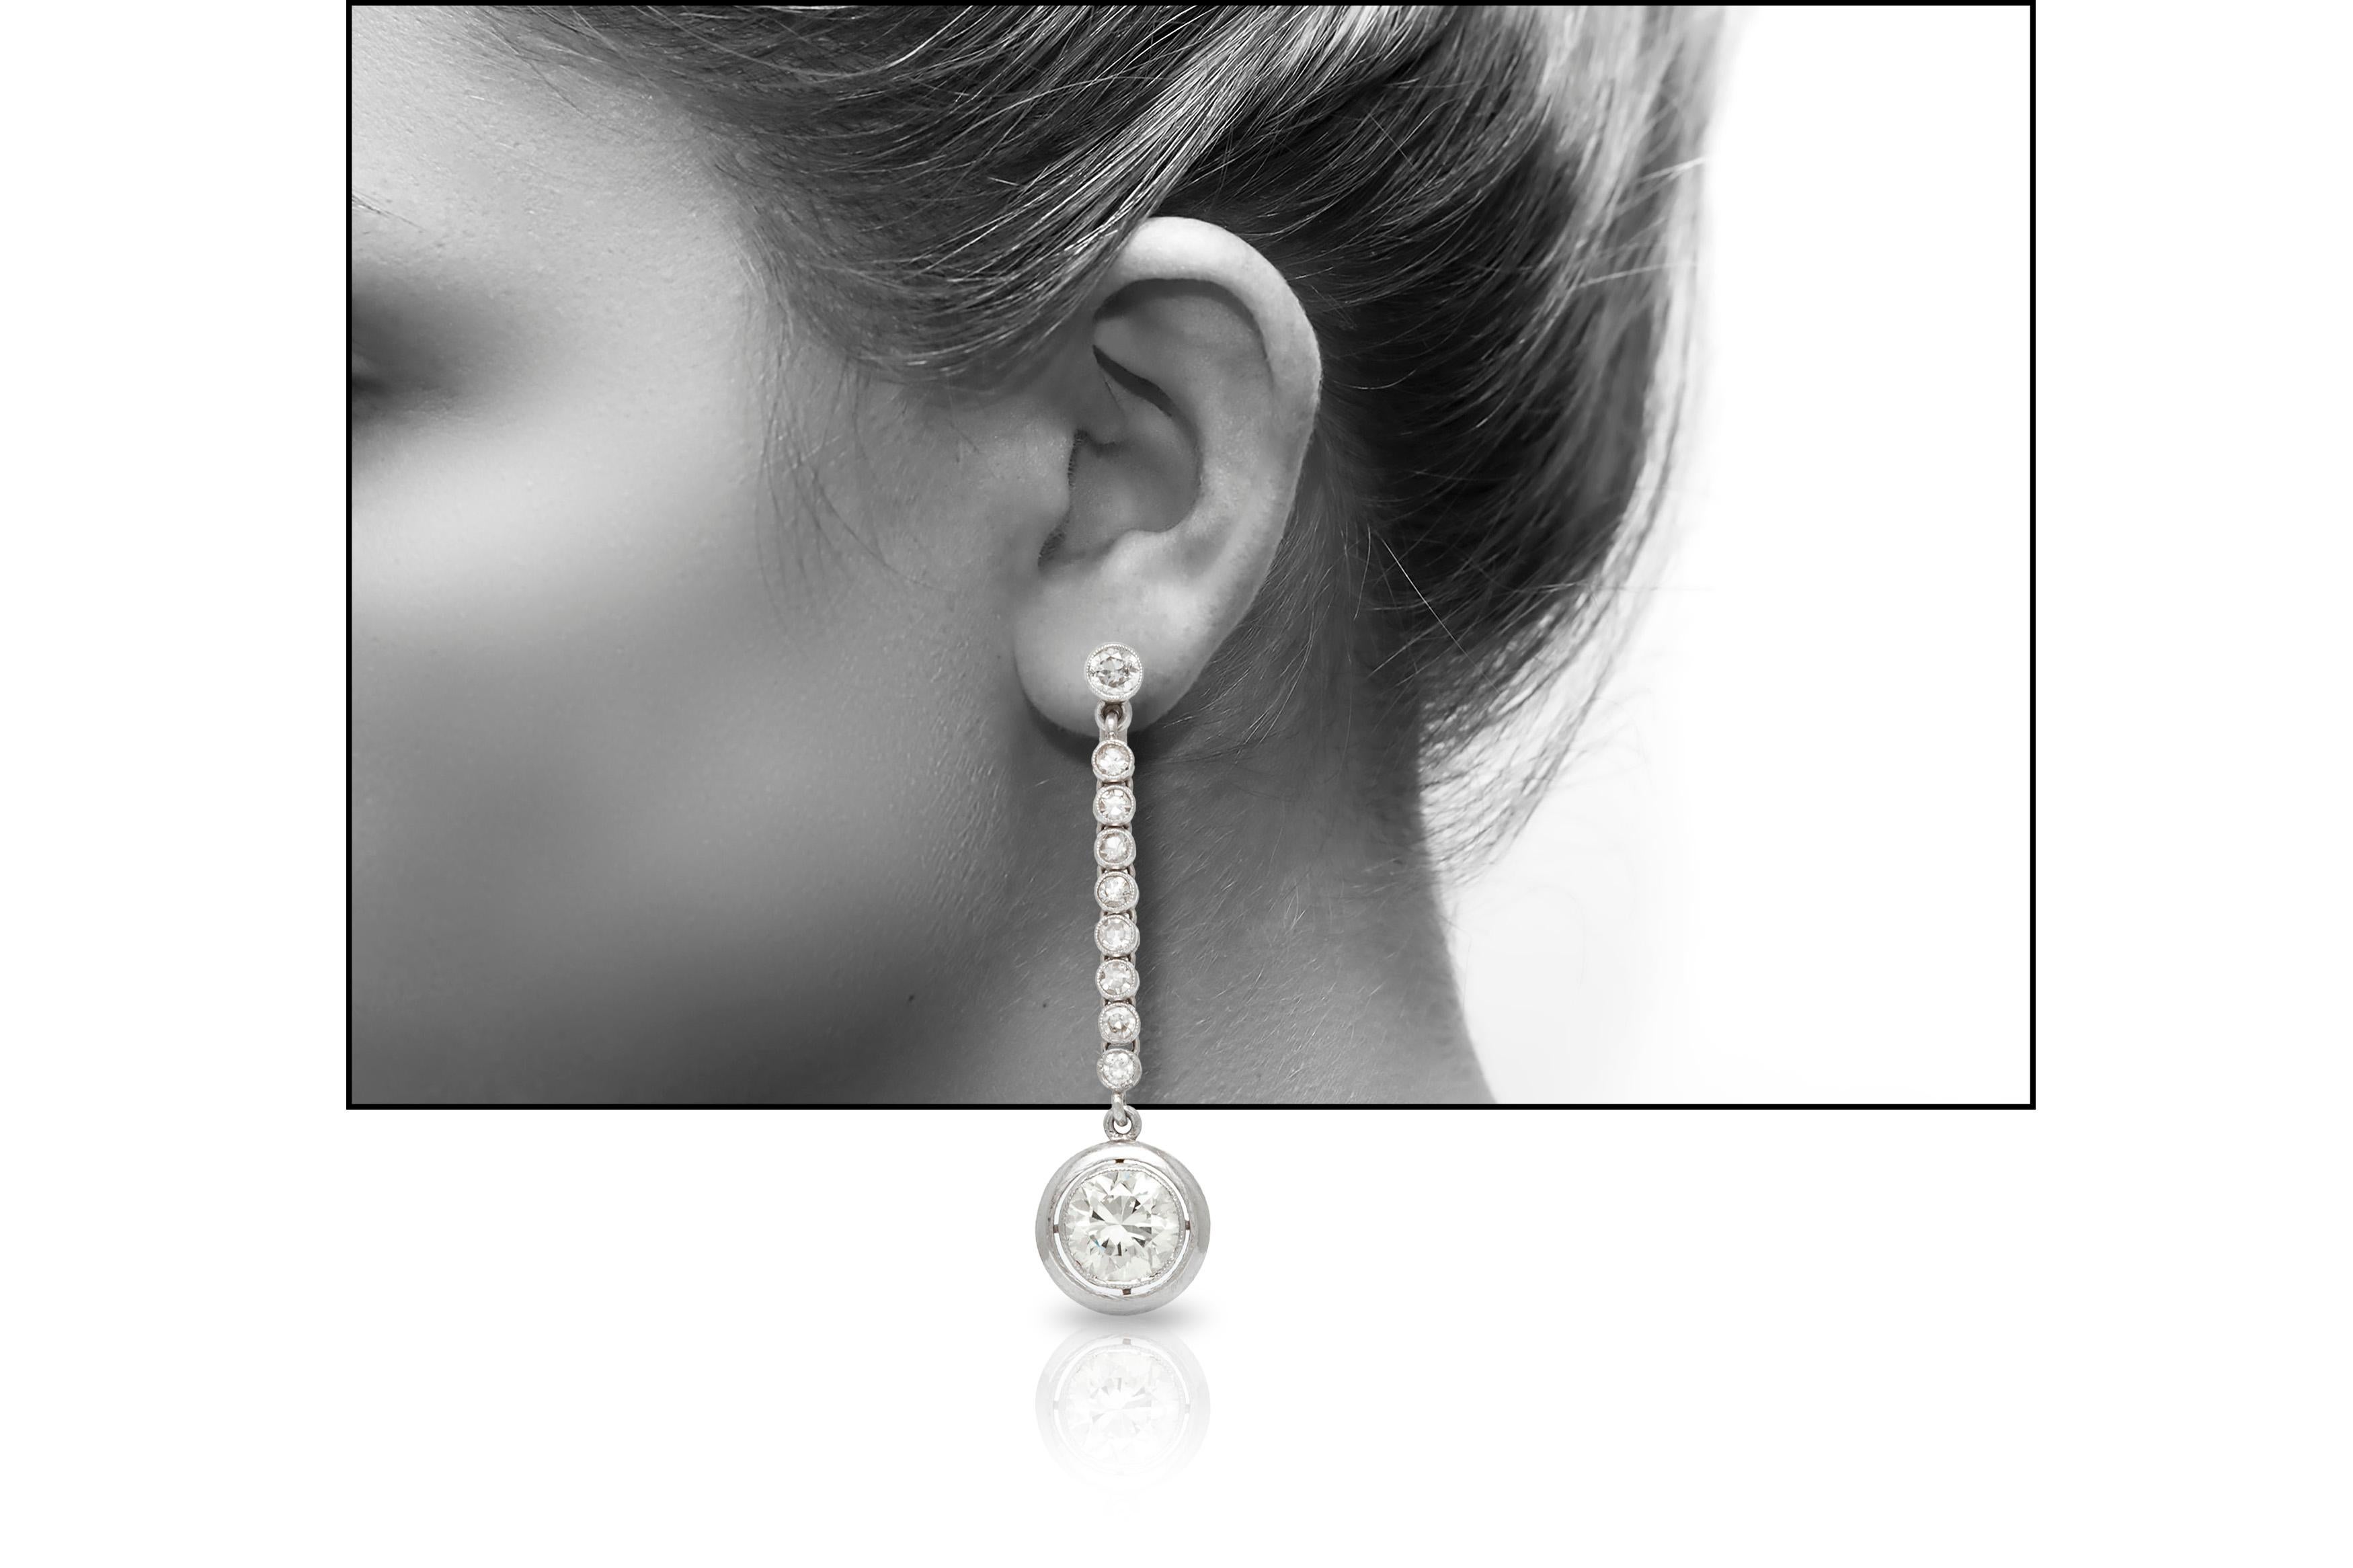 The earrings is finely crafted in platinum and 18k the post with two big stone weighing approximately total of 4.00 and the rest of the diamonds is weighing approximately total of 0.90carat.
